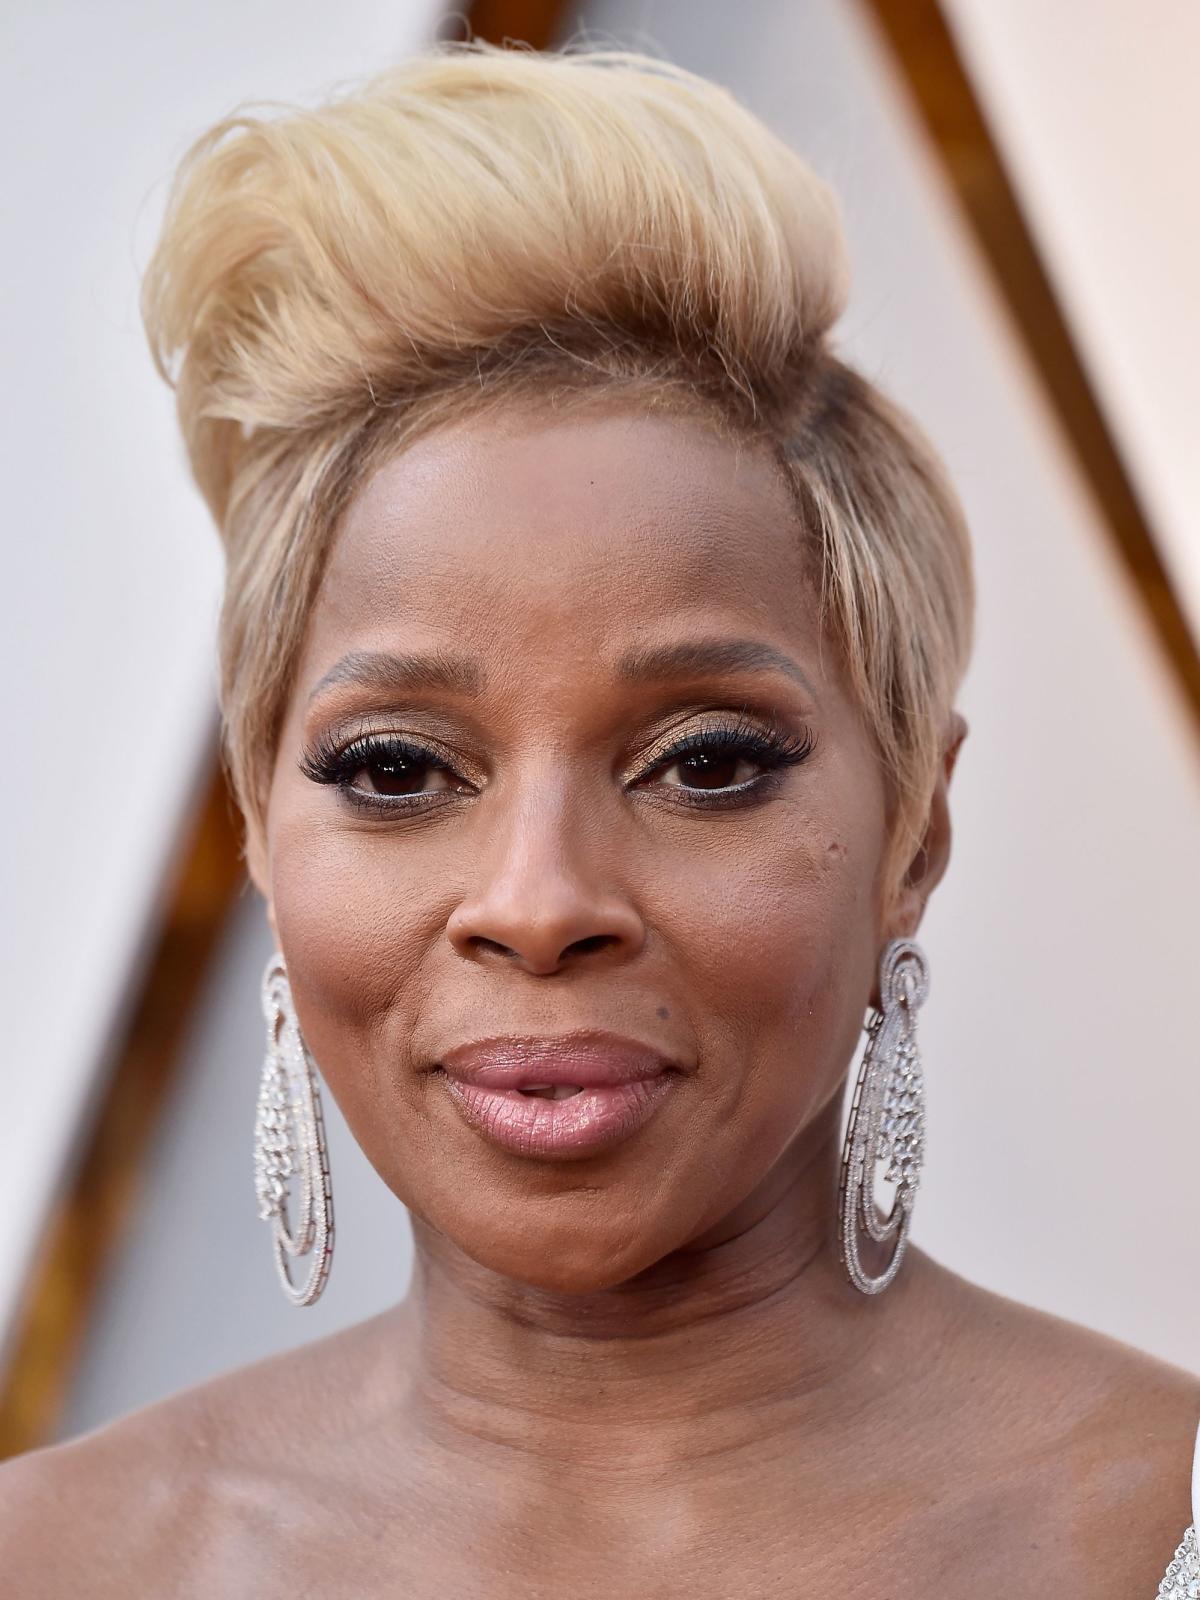 Mary J. Blige's Hair and Makeup Artists Reveal Their Super Bowl Glam  Secrets